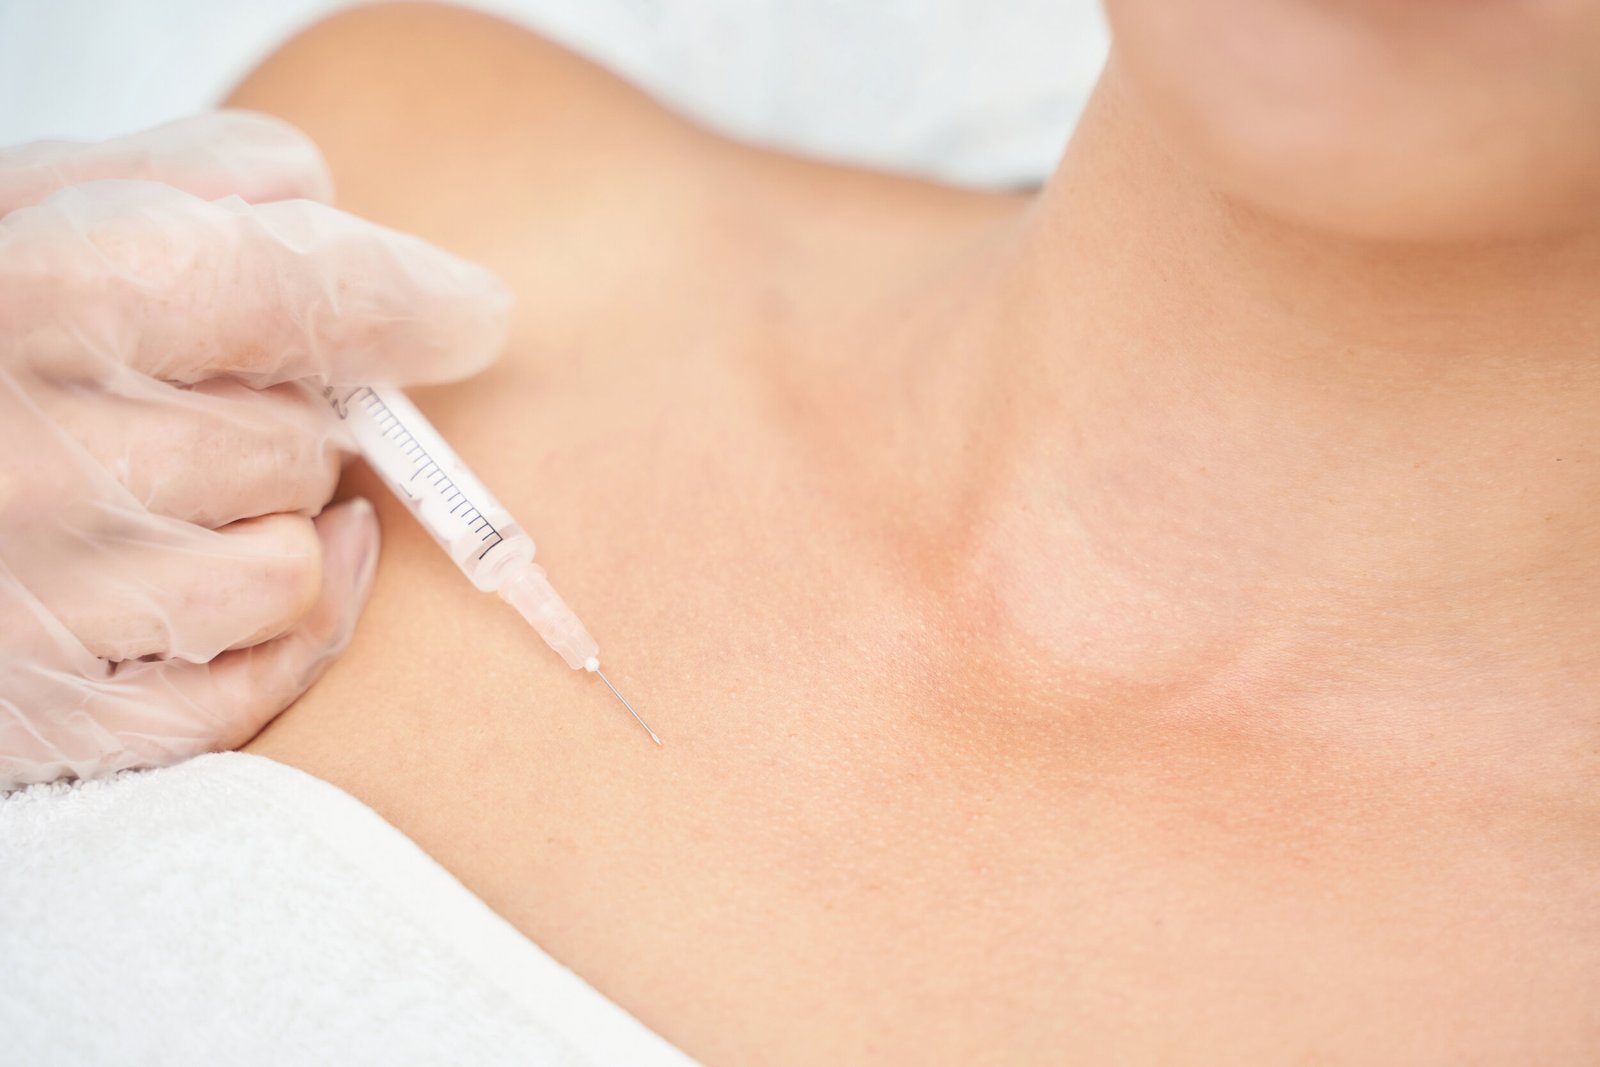 Vampire Breast Lift Treatment: The Secret to Achieve Youthful Breast